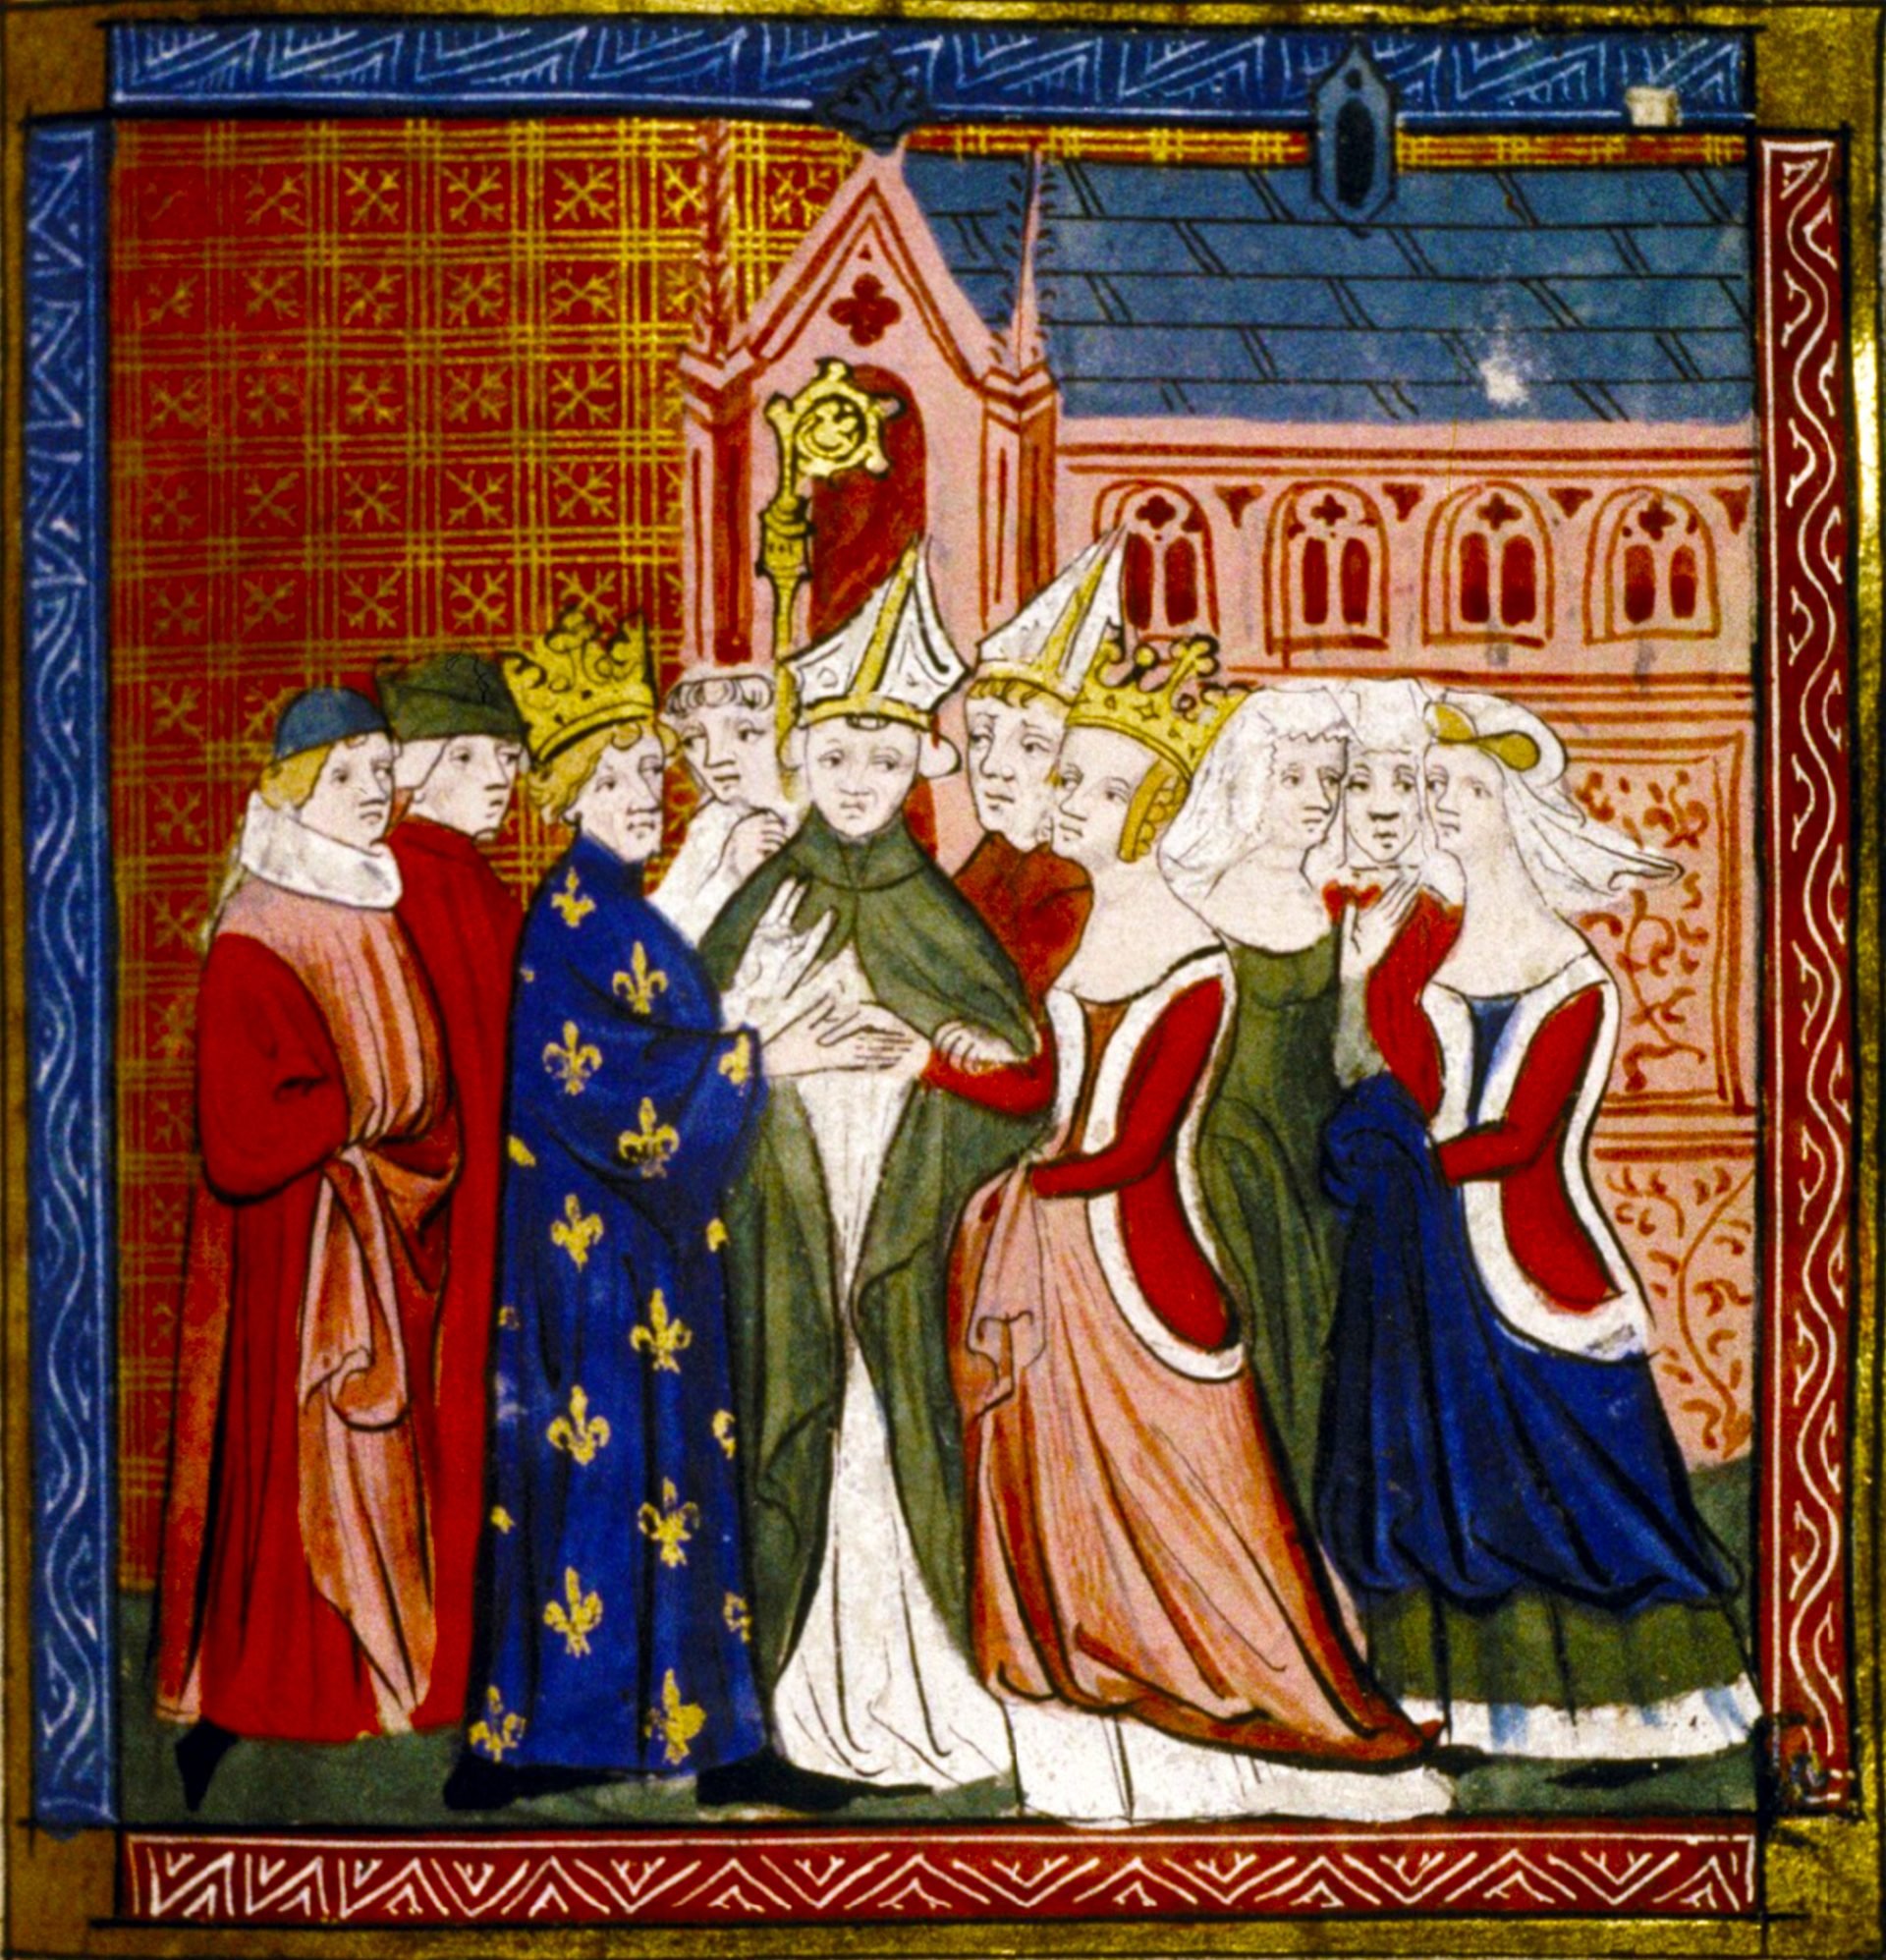 A medieval manuscript illustration of the marriage ceremony of Eleanor of Aquitaine and Louis VII of France. Ten figures stand in front of a red brick church with a blue roof. They wear long robes in various colors. The background is a red and gold patterned design.